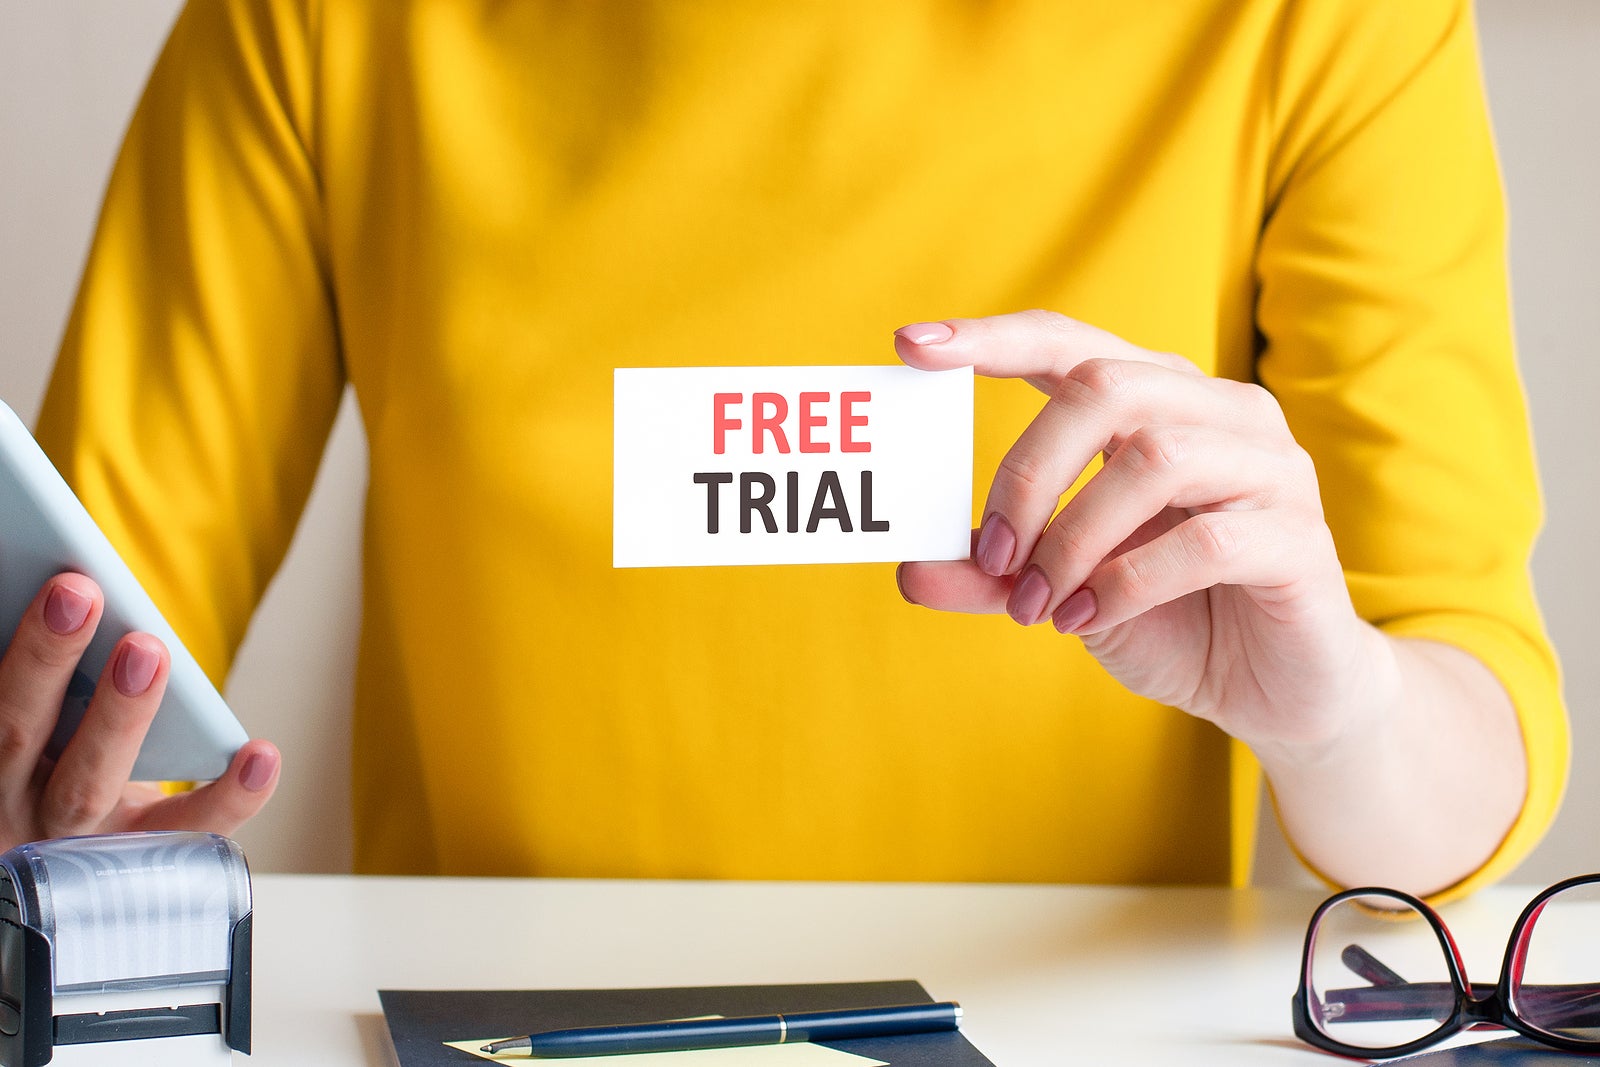 How to Develop a Successful Free Trial Marketing Strategy